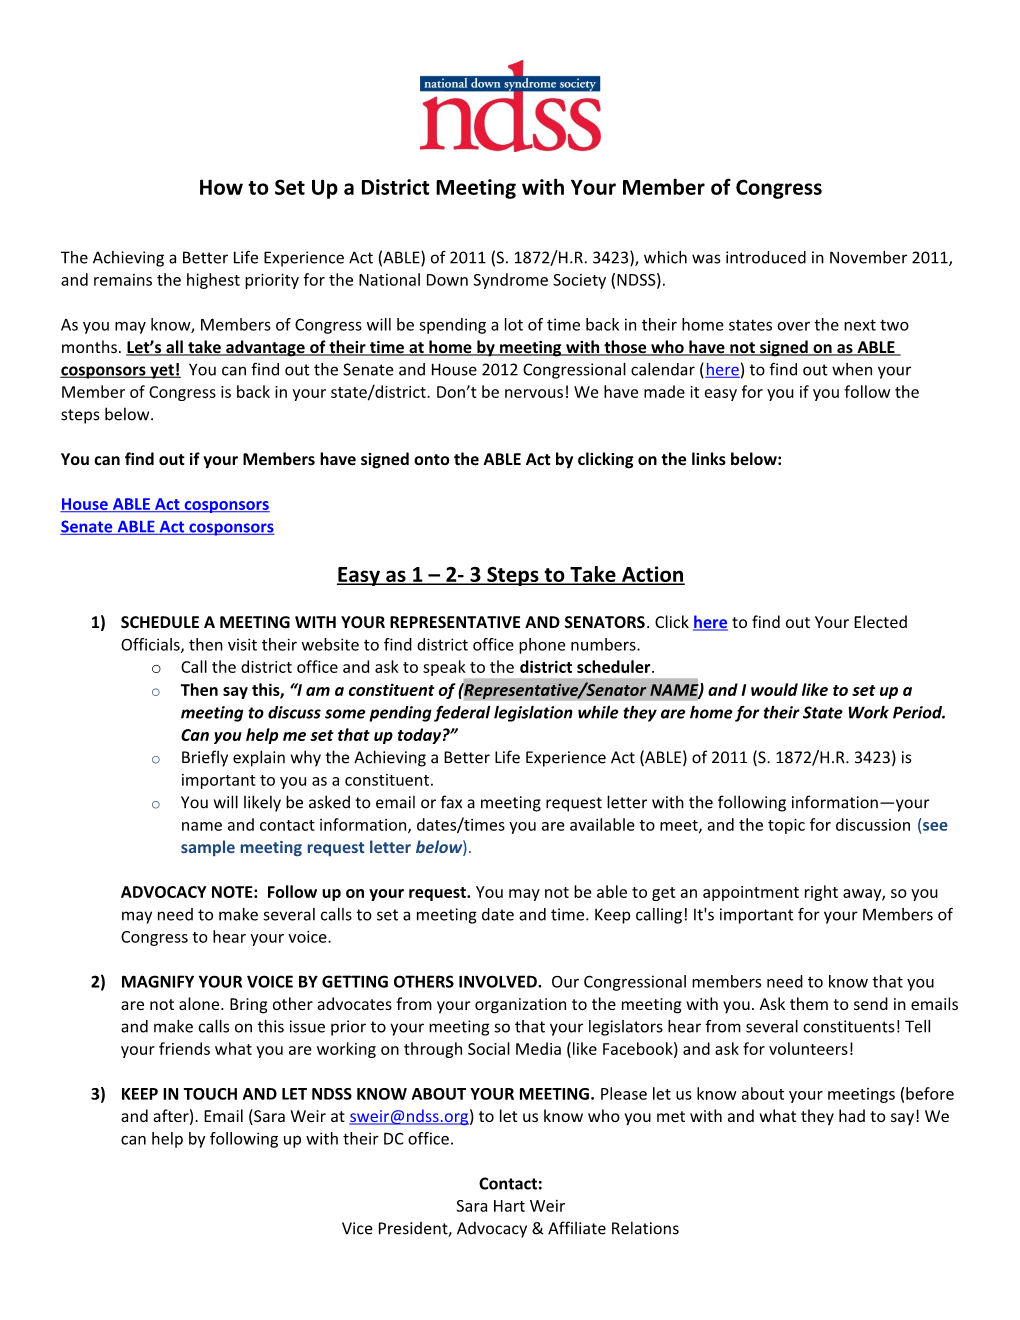 How to Set up a District Meeting with Your Member of Congress